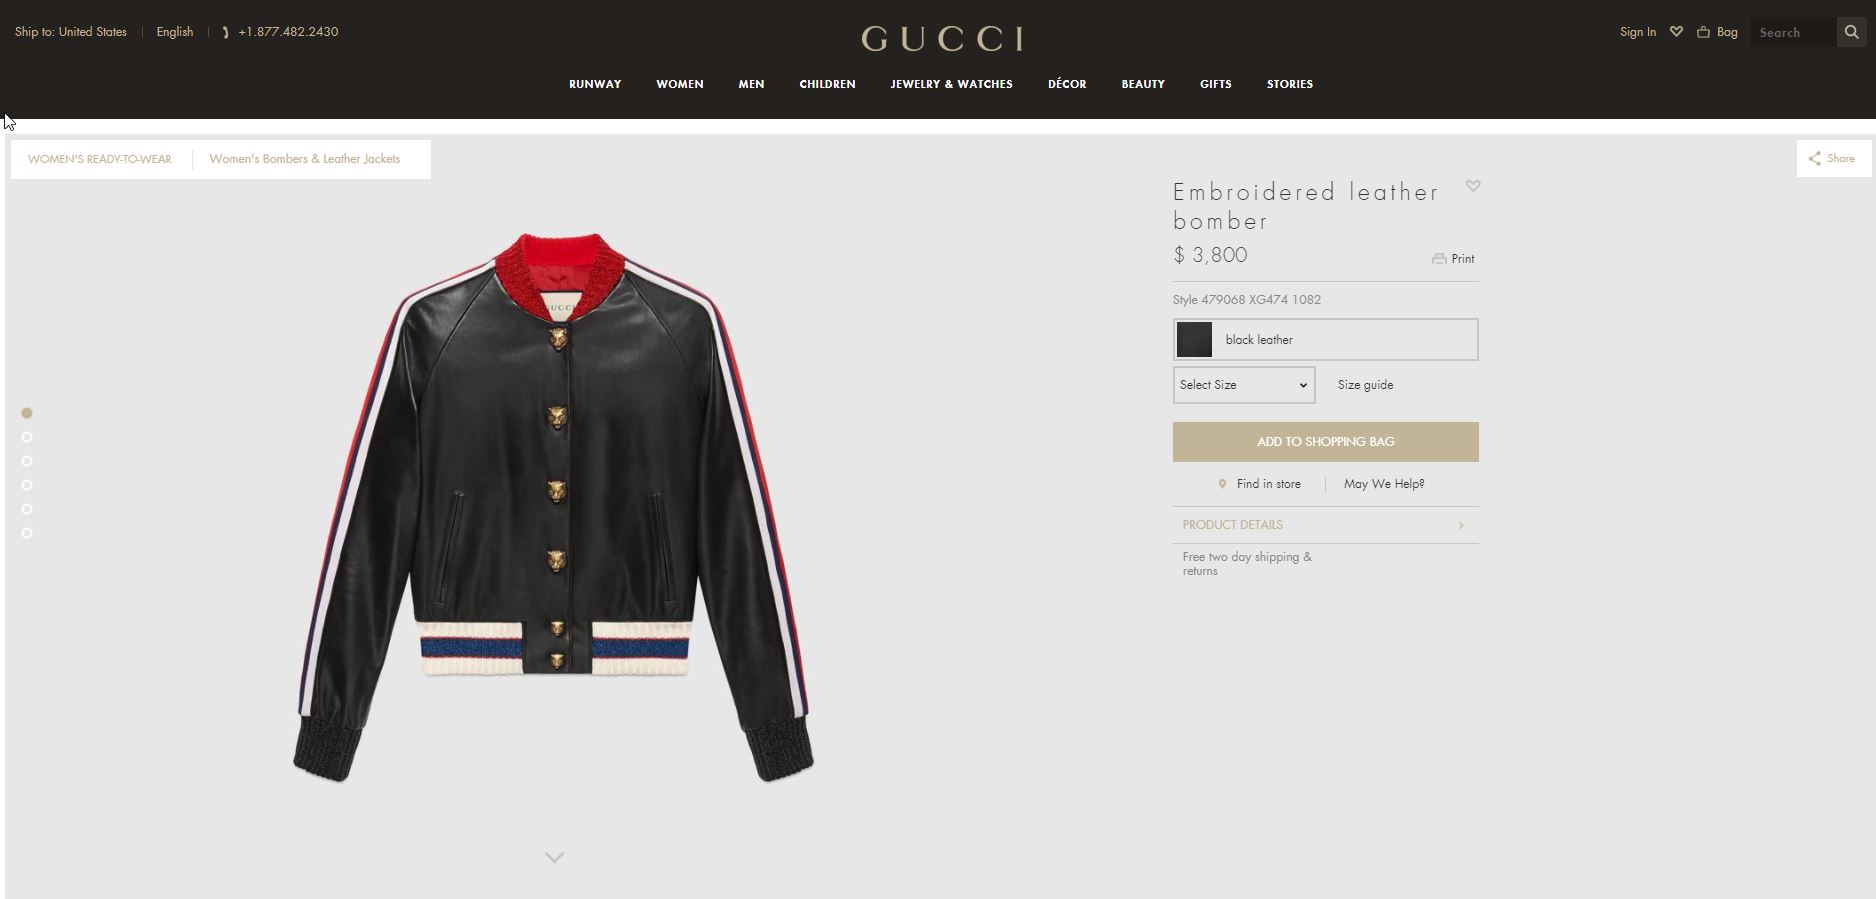 2017-12-11 11_28_31-Embroidered leather bomber - Gucci Women's Bombers & Leather Jackets 479068XG474